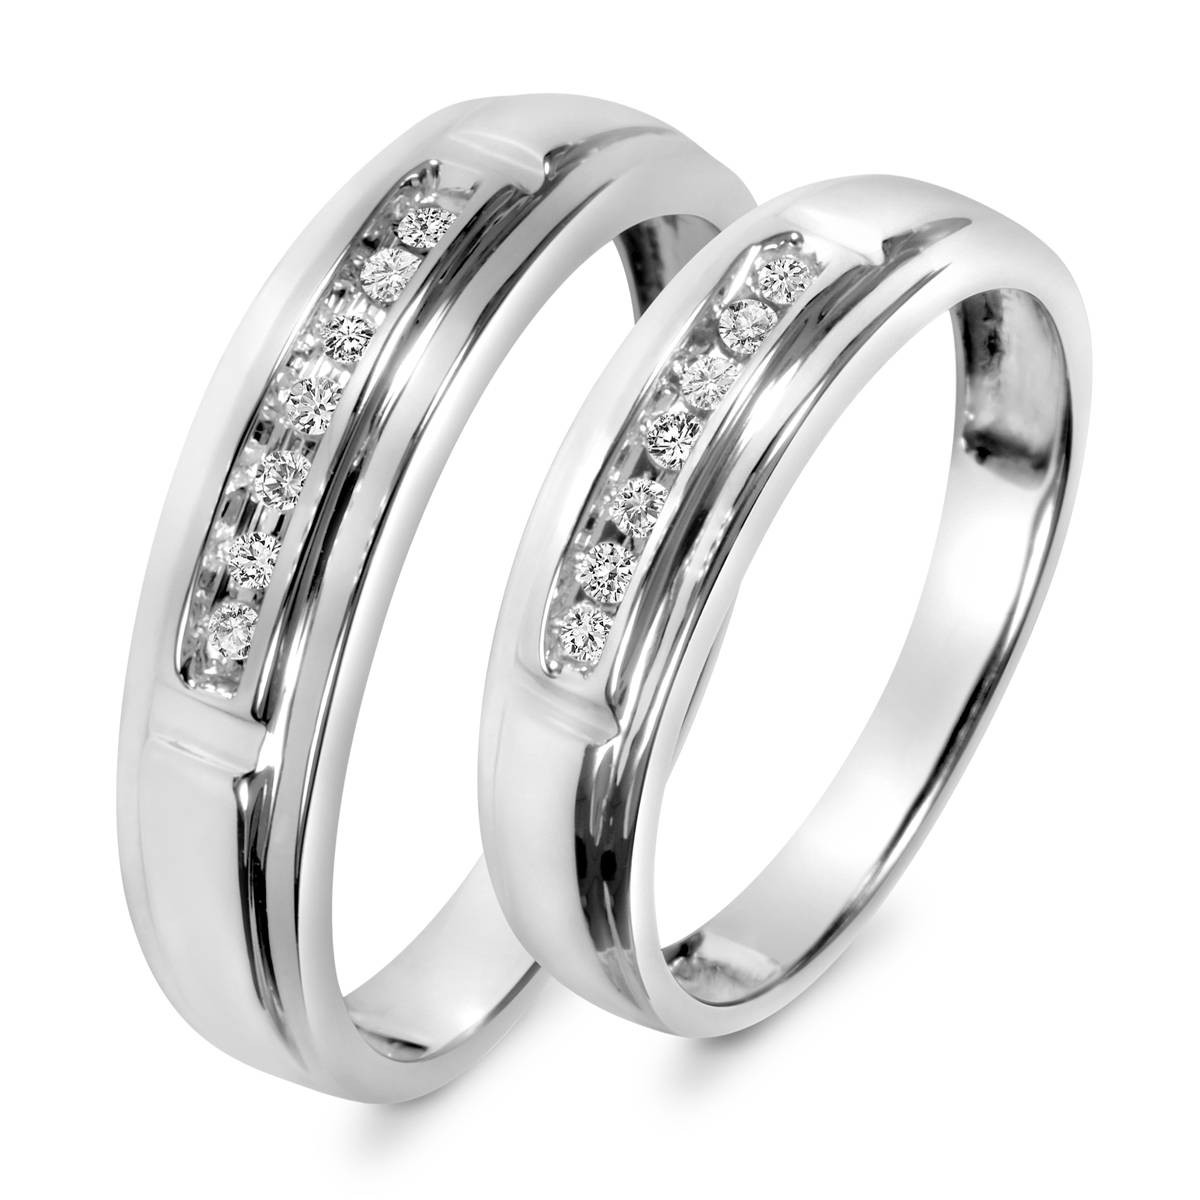 Wedding Bands Sets His And Hers
 15 Inspirations of Cheap Wedding Bands Sets His And Hers